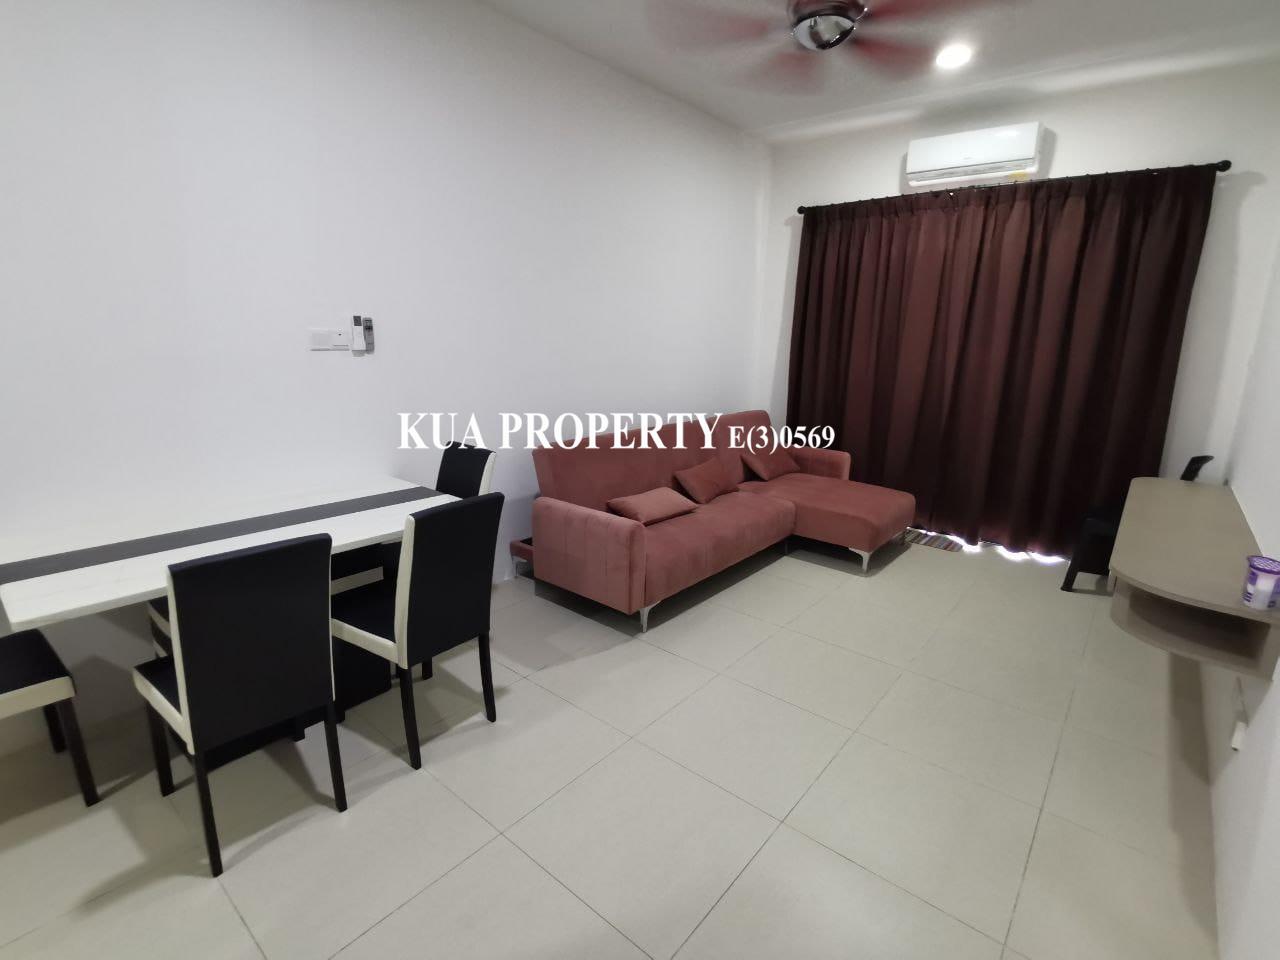 P Residence Dual Key For Rent (2 bedrooms) For rent !